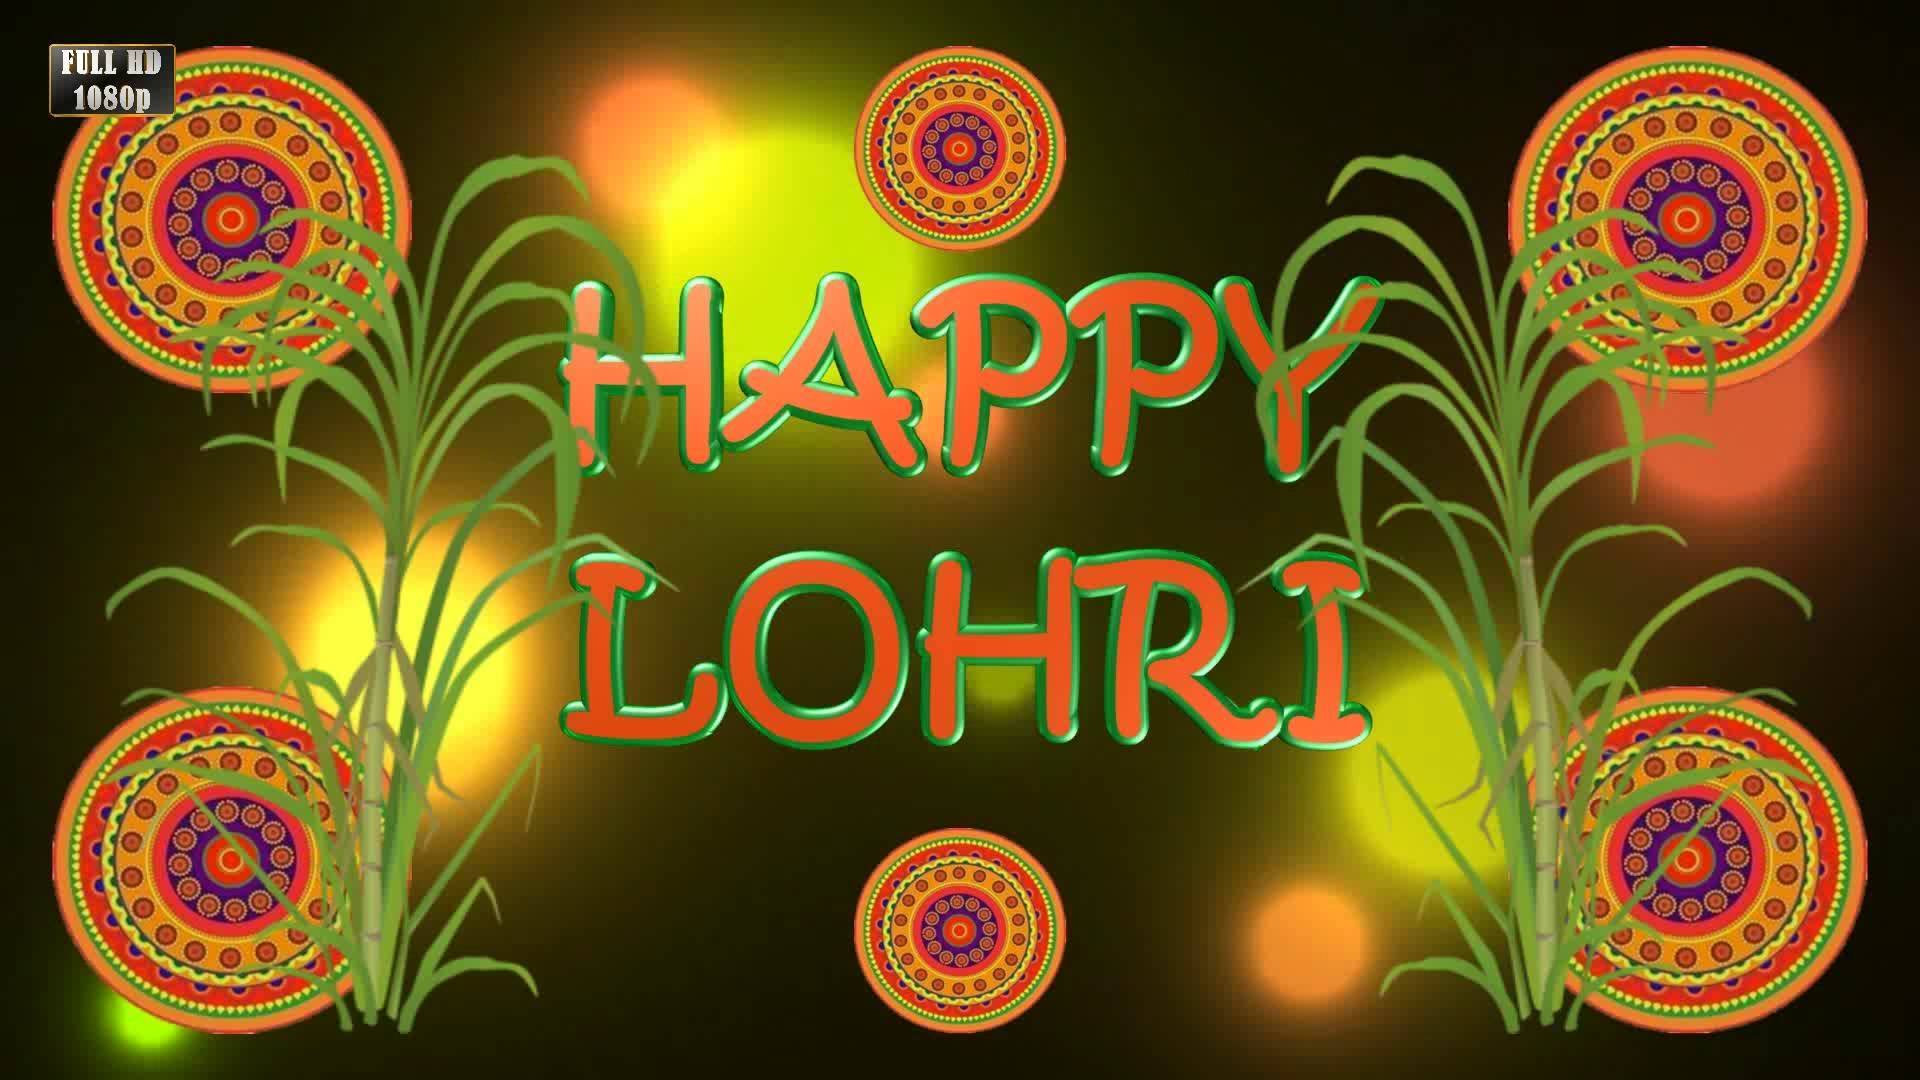 Happy Lohri Hd Images Full Size Download